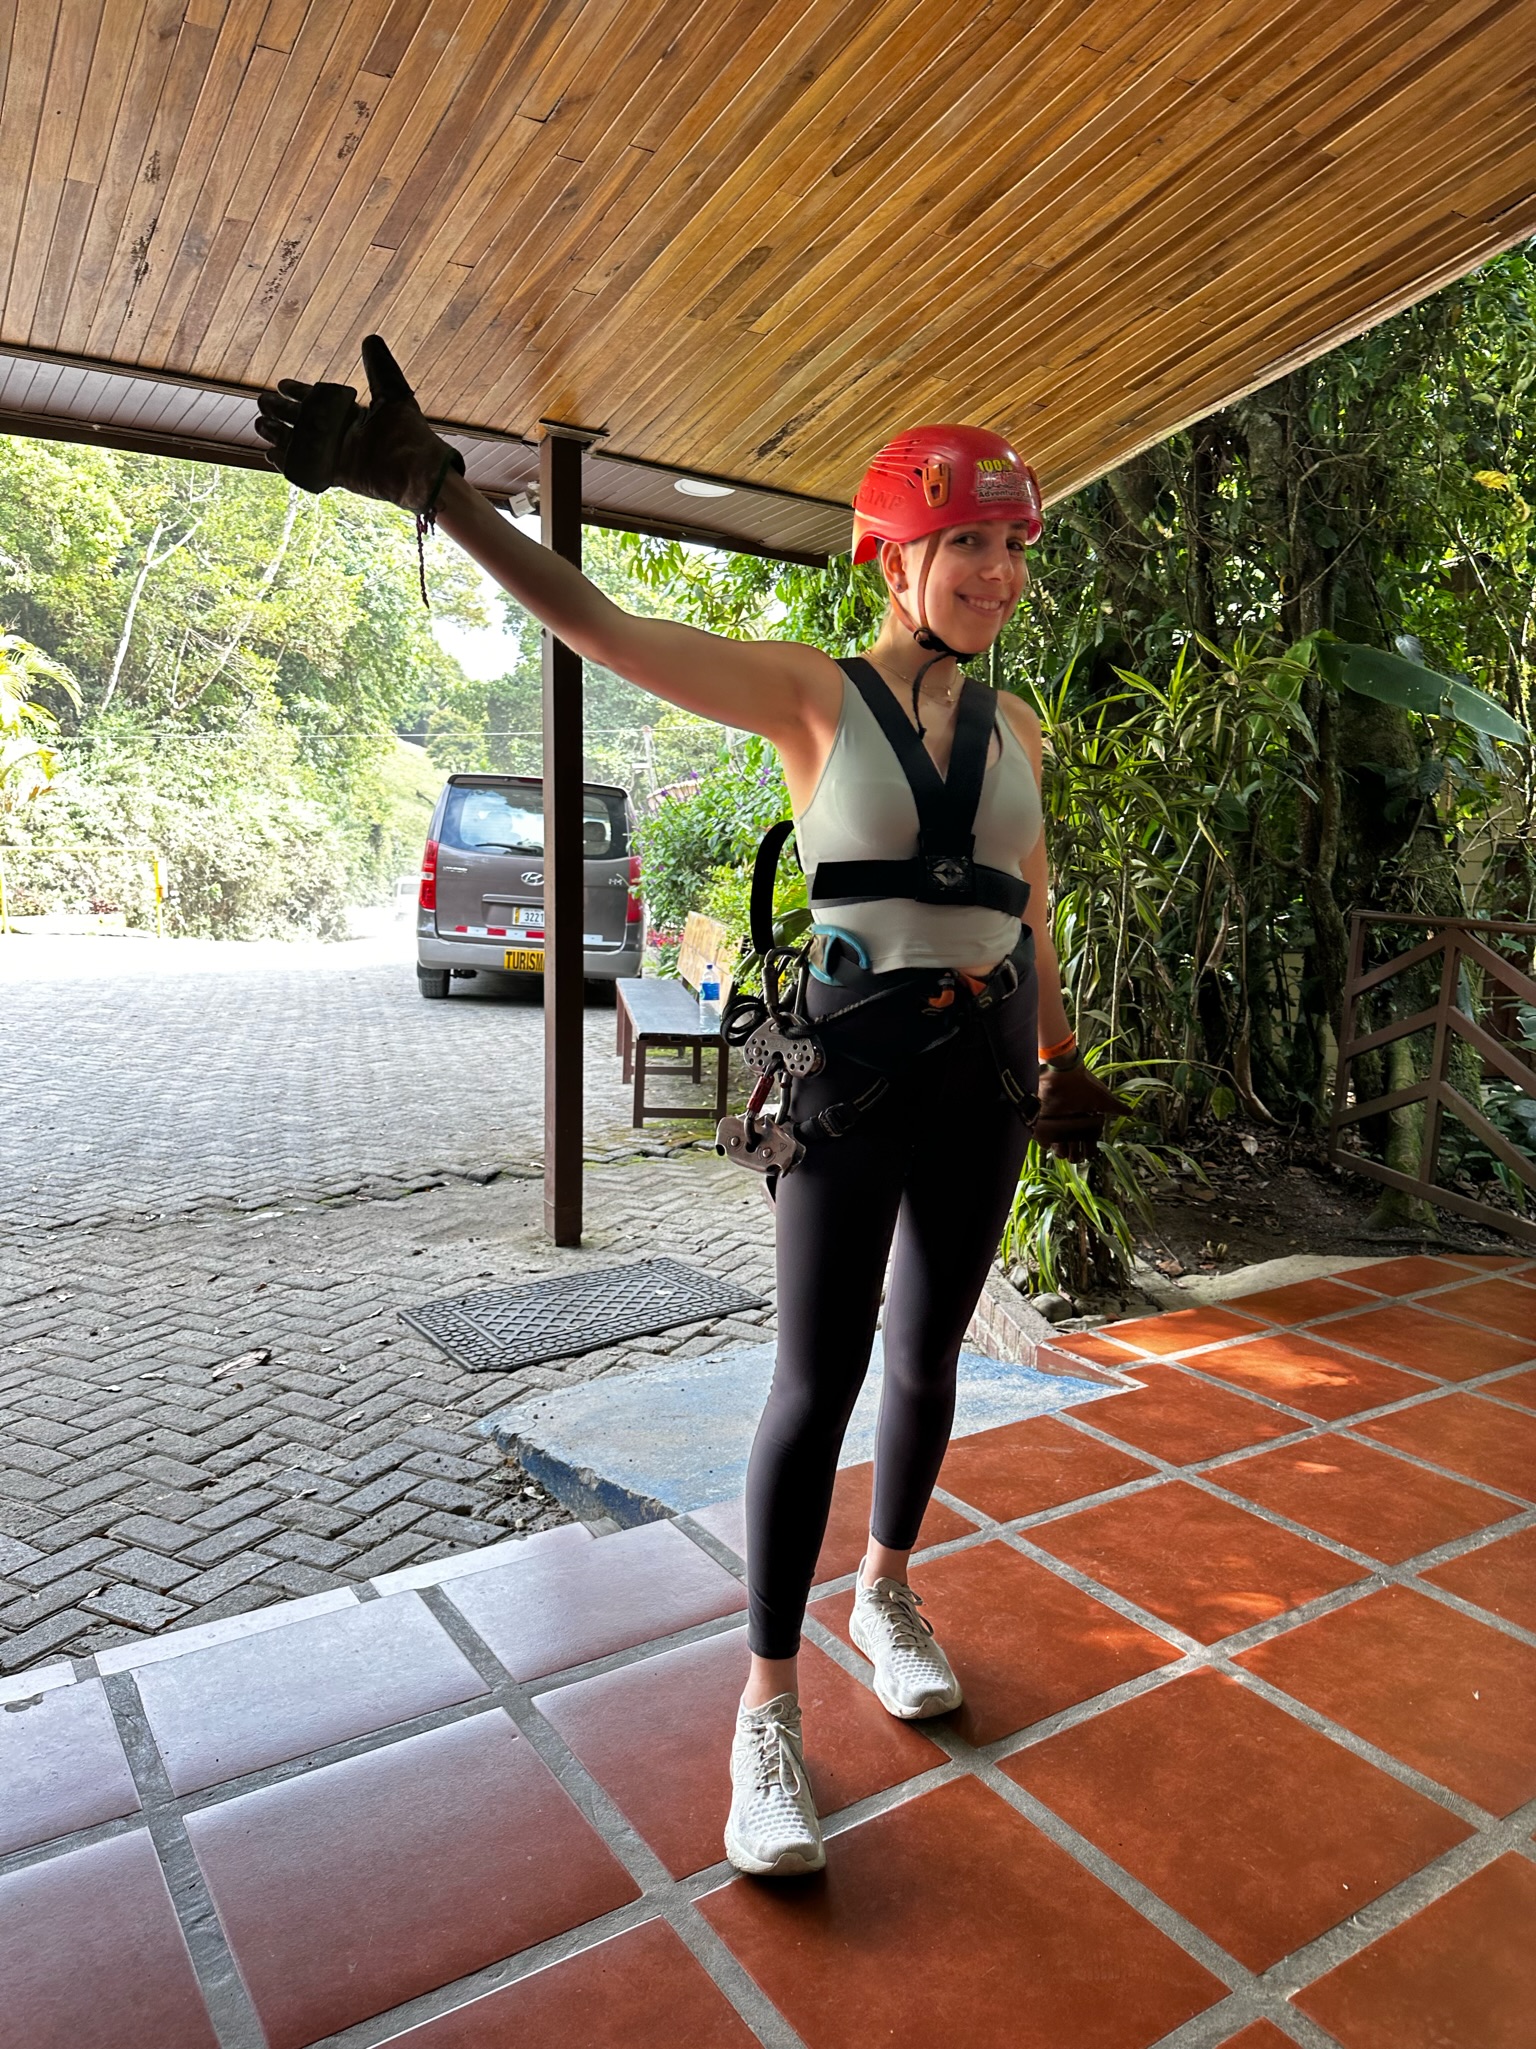  Nicole Lulkin, whose first language was Russian, conquered a fear of heights by ziplining over the Monteverdes Cloud Forest in Costa Rica. 